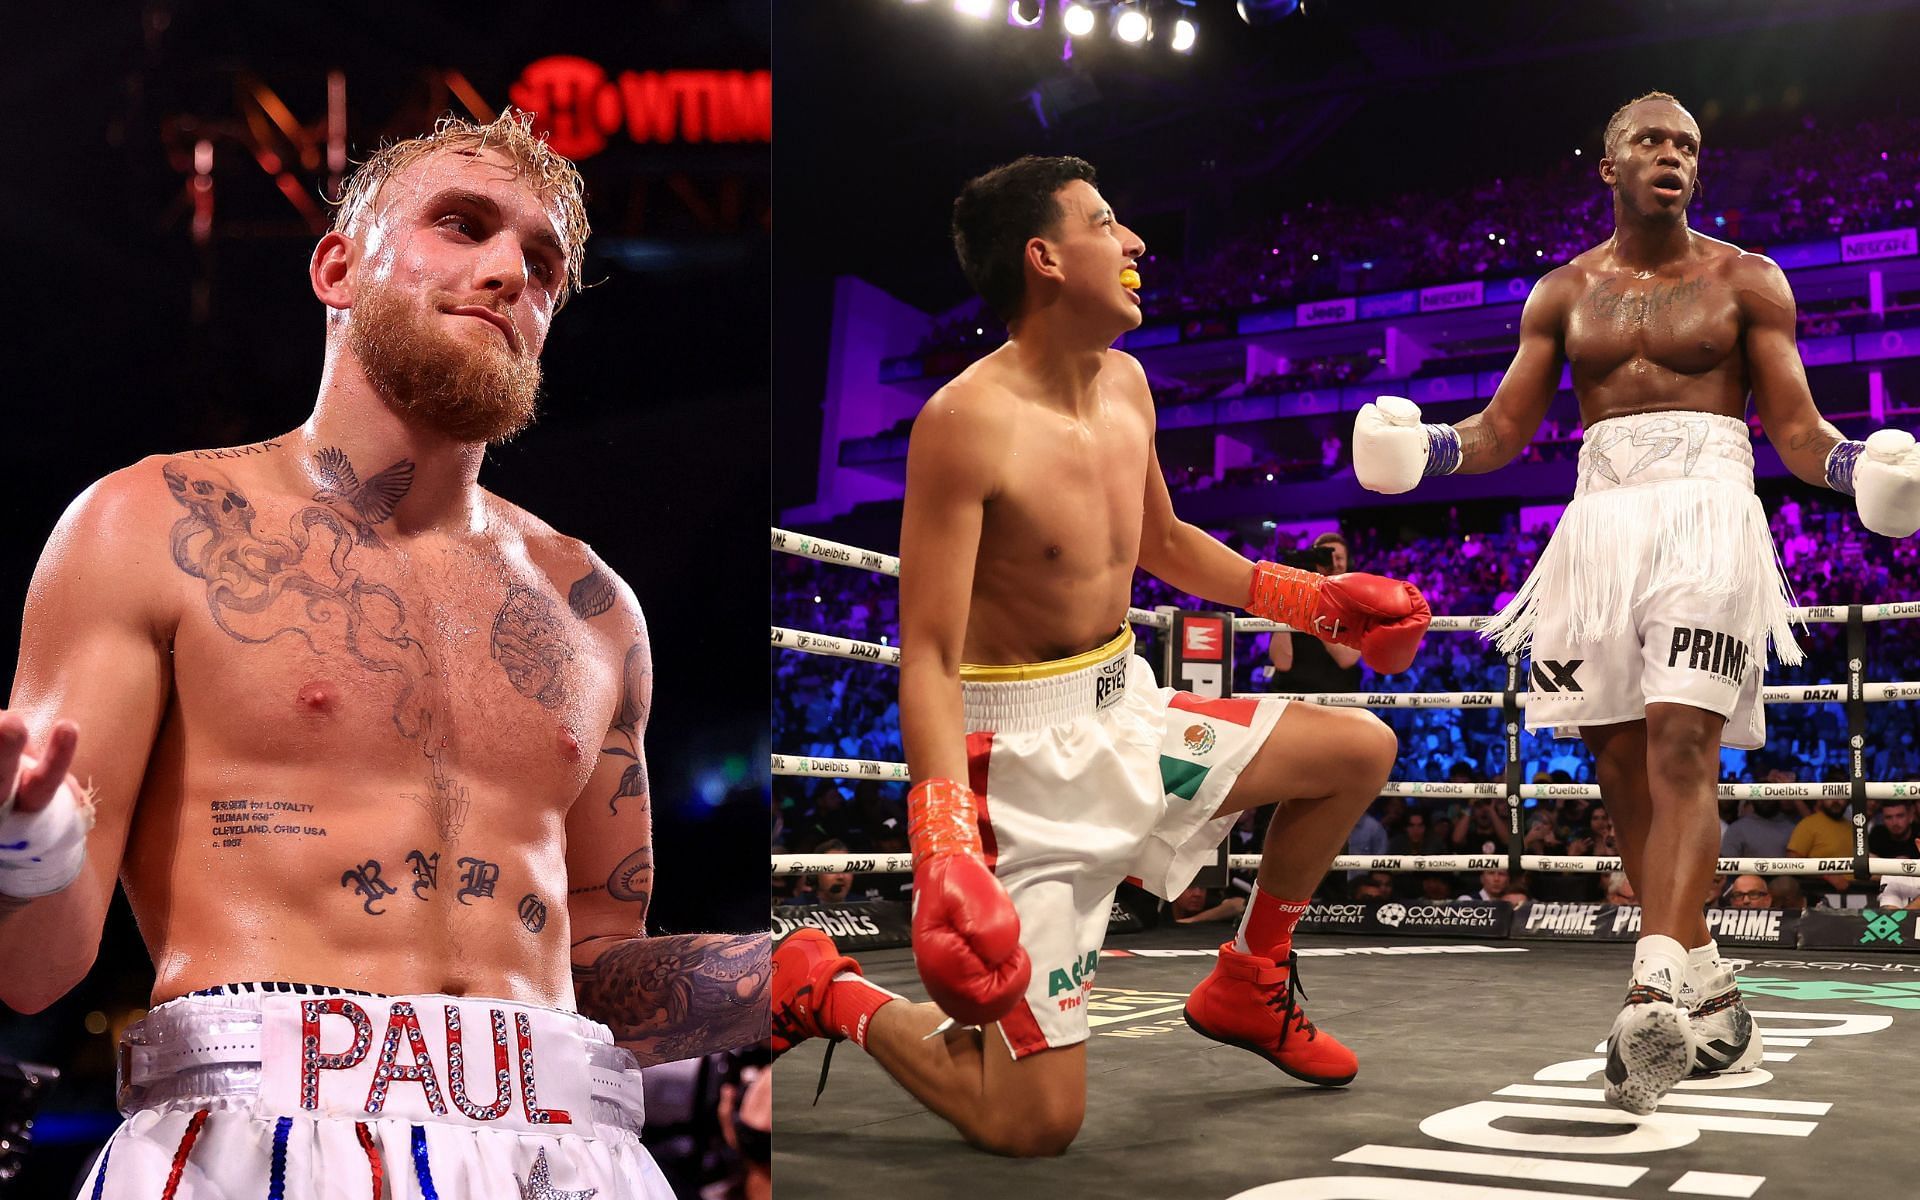 Jake Paul (left) and Luis Alcaraz Pineda kneeling against KSI (right) (Image credits Getty Images)